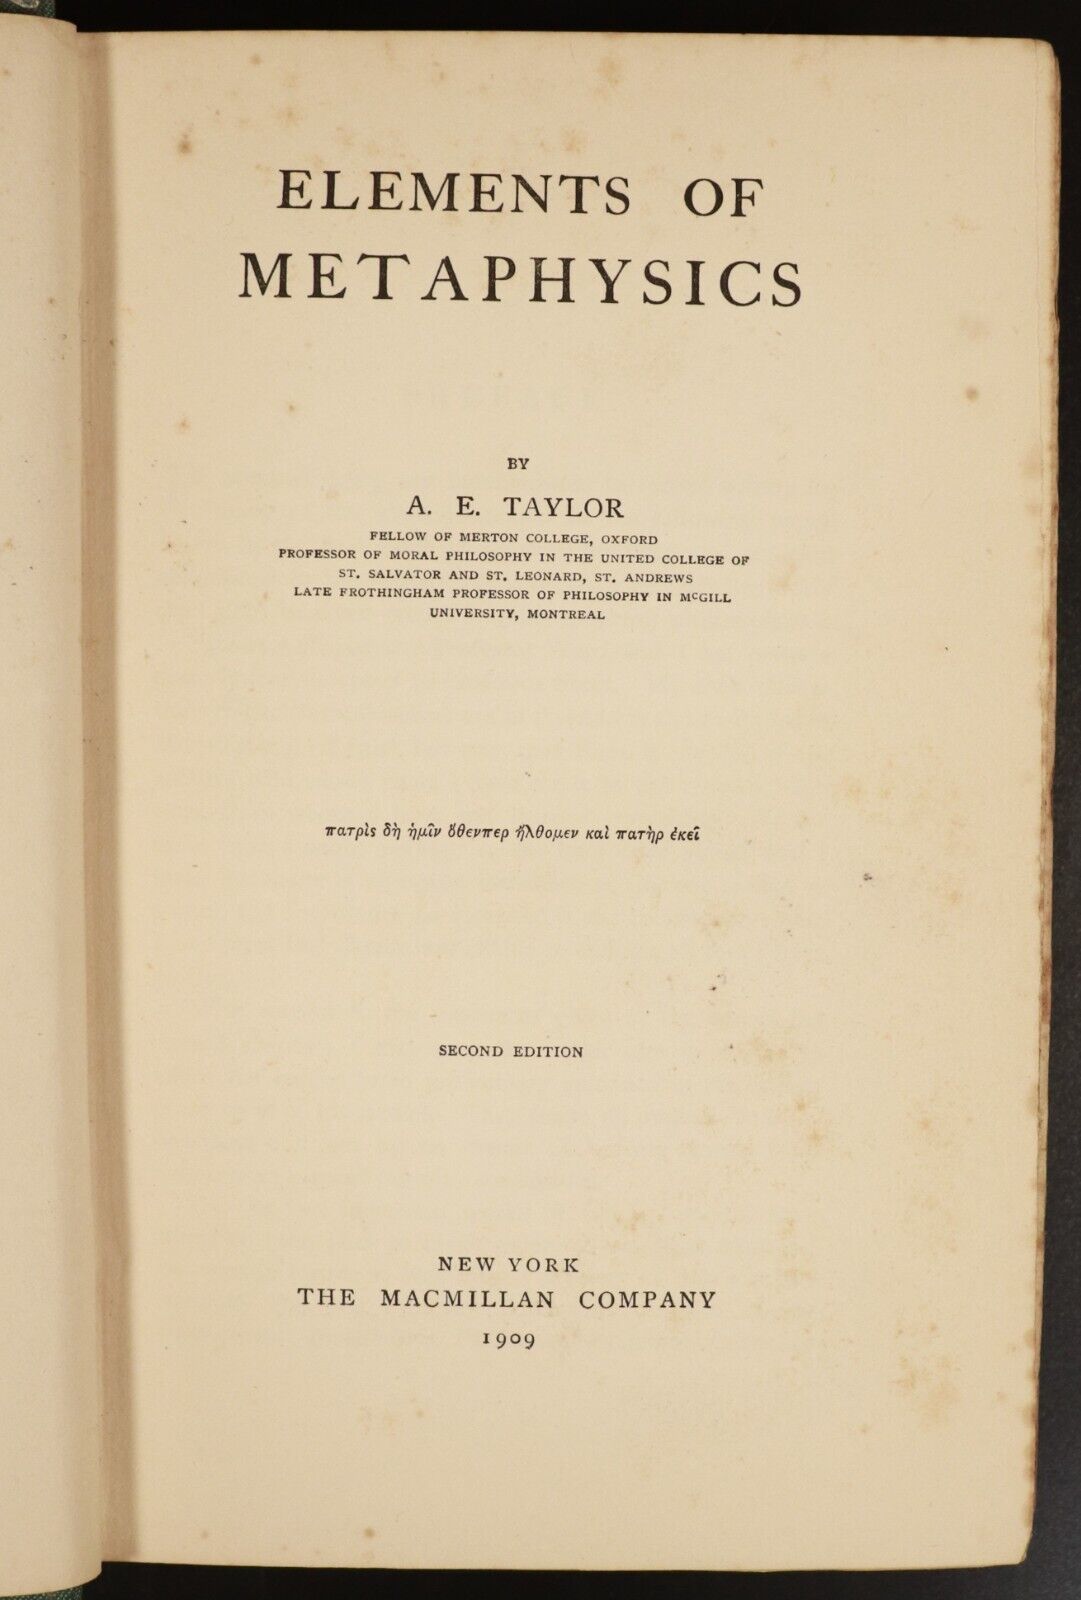 1909 Elements Of Metaphysics by AE Taylor 1st Edition Antique Philosophy Book - 0